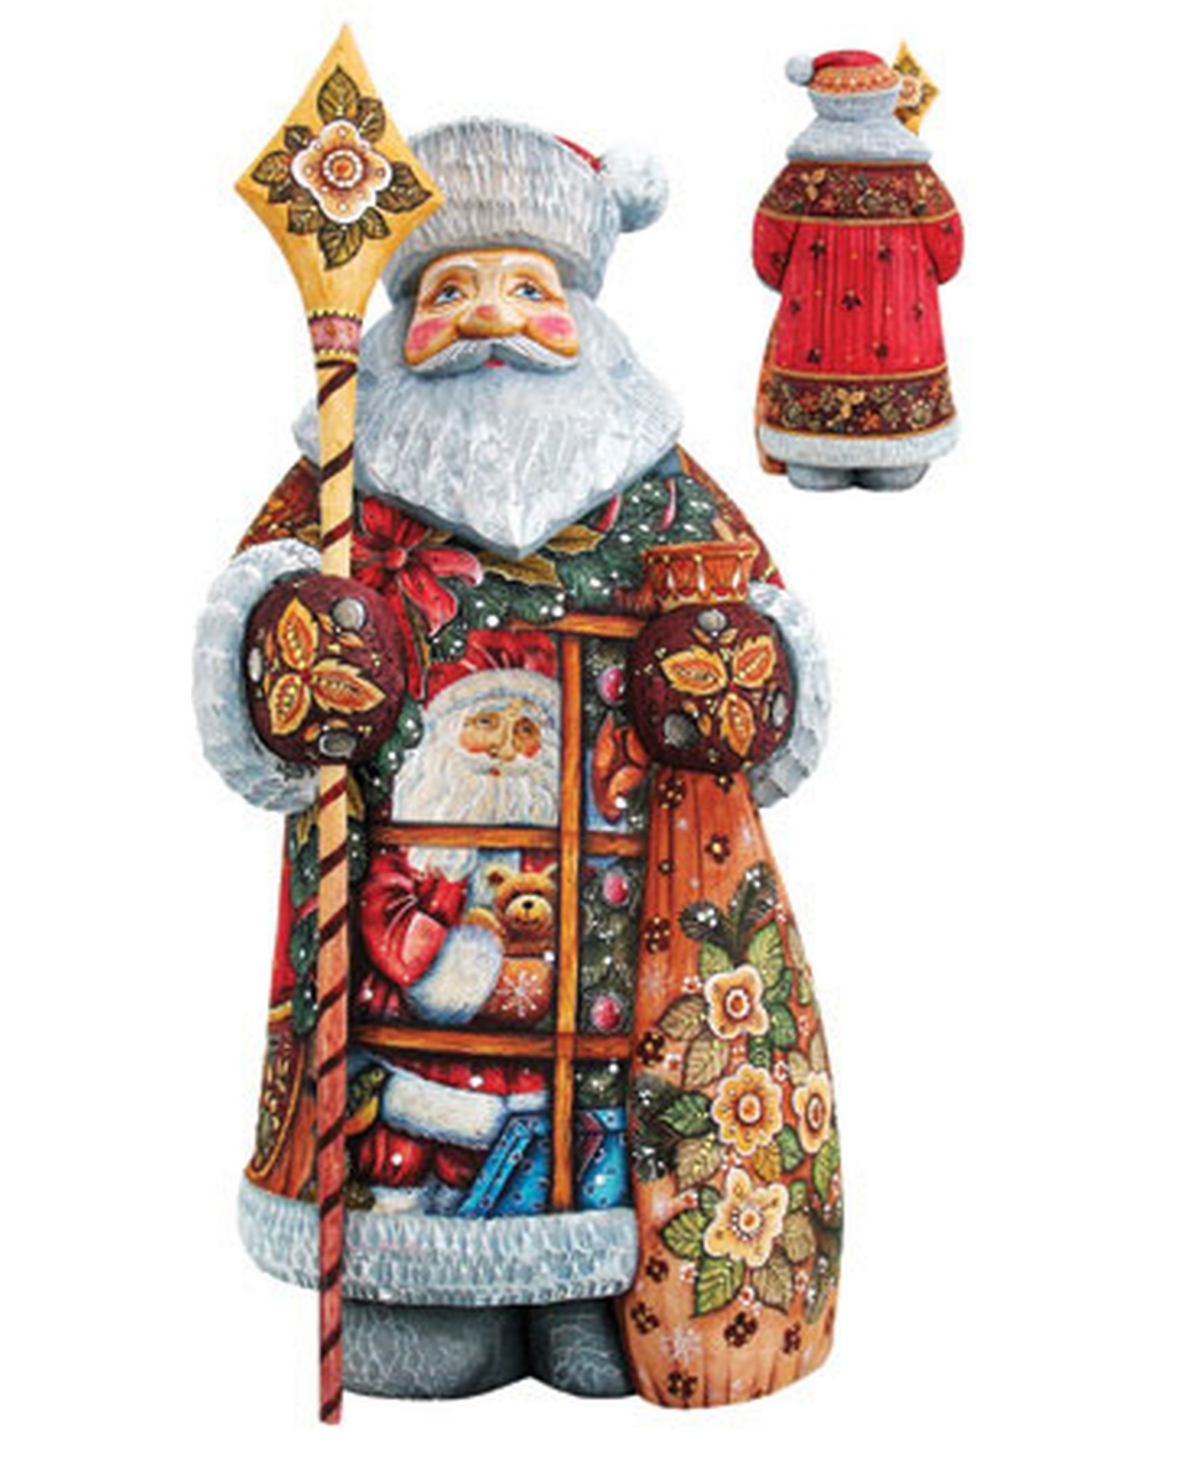 Woodcarved Hand Painted Give A Gift Santa Figurine - Multi